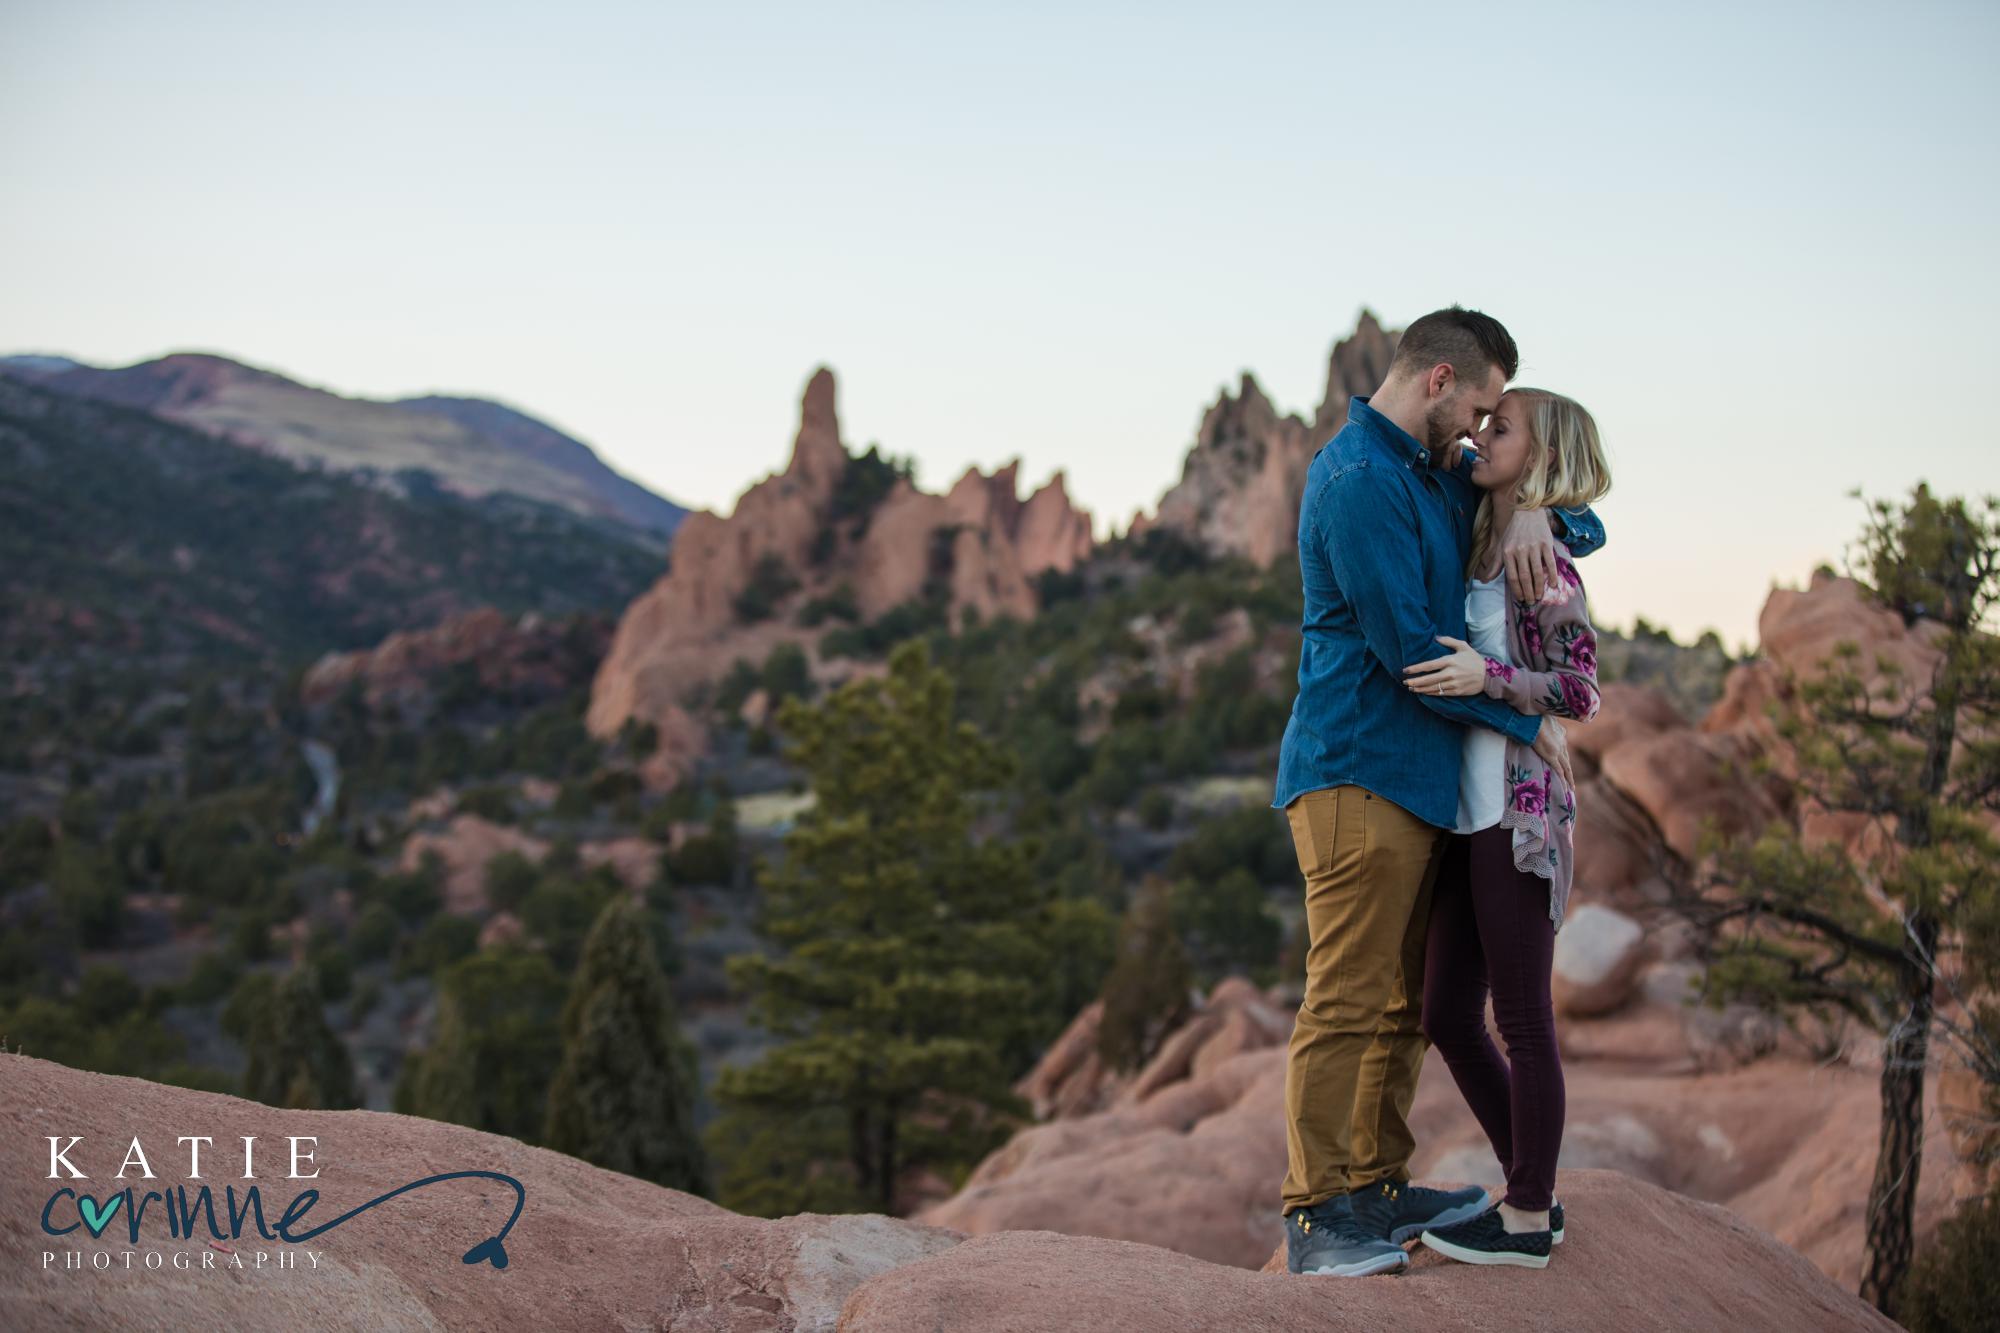 Newly engaged Colorado springs couple kiss on top of mountain